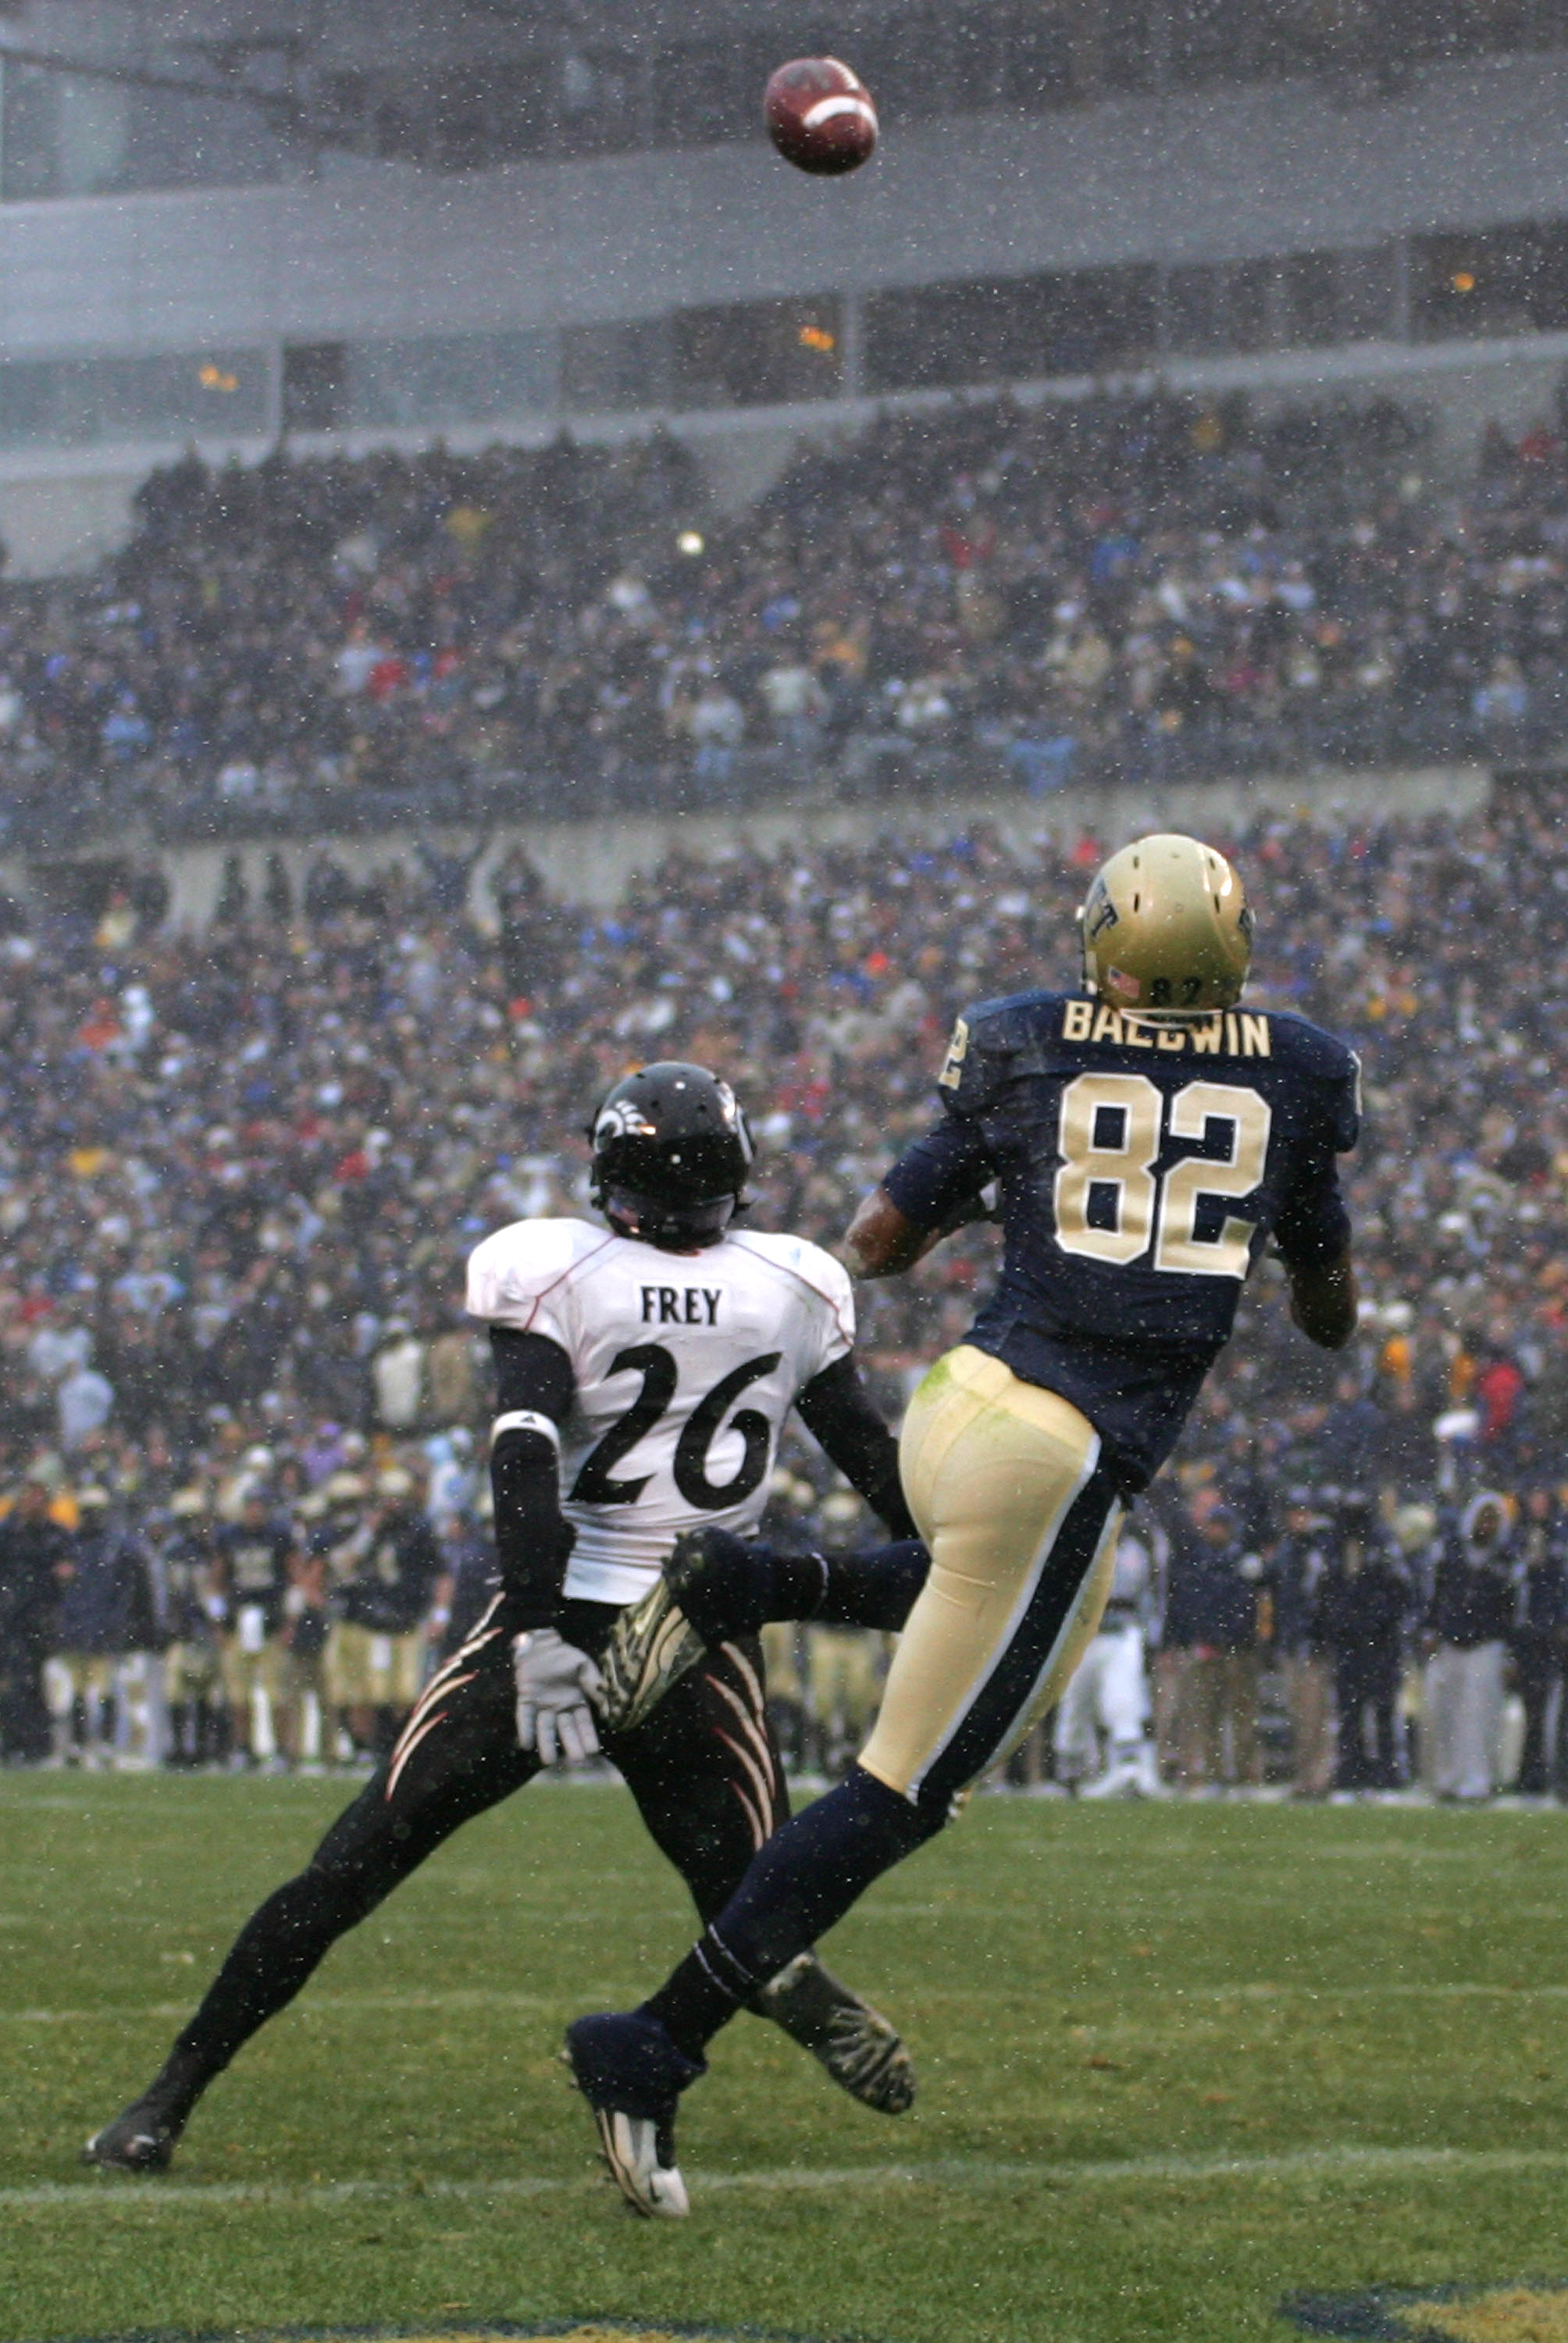 PITTSBURGH - DECEMBER 05:  Jonathan Baldwin #82 of the University of Pittsburgh Panthers catches a touchdown in the fourth quarter against the Cincinnati Bearcats on December 5, 2009 at Heinz Field in Pittsburgh, Pennsylvania. (Photo by Jared Wickerham/Ge